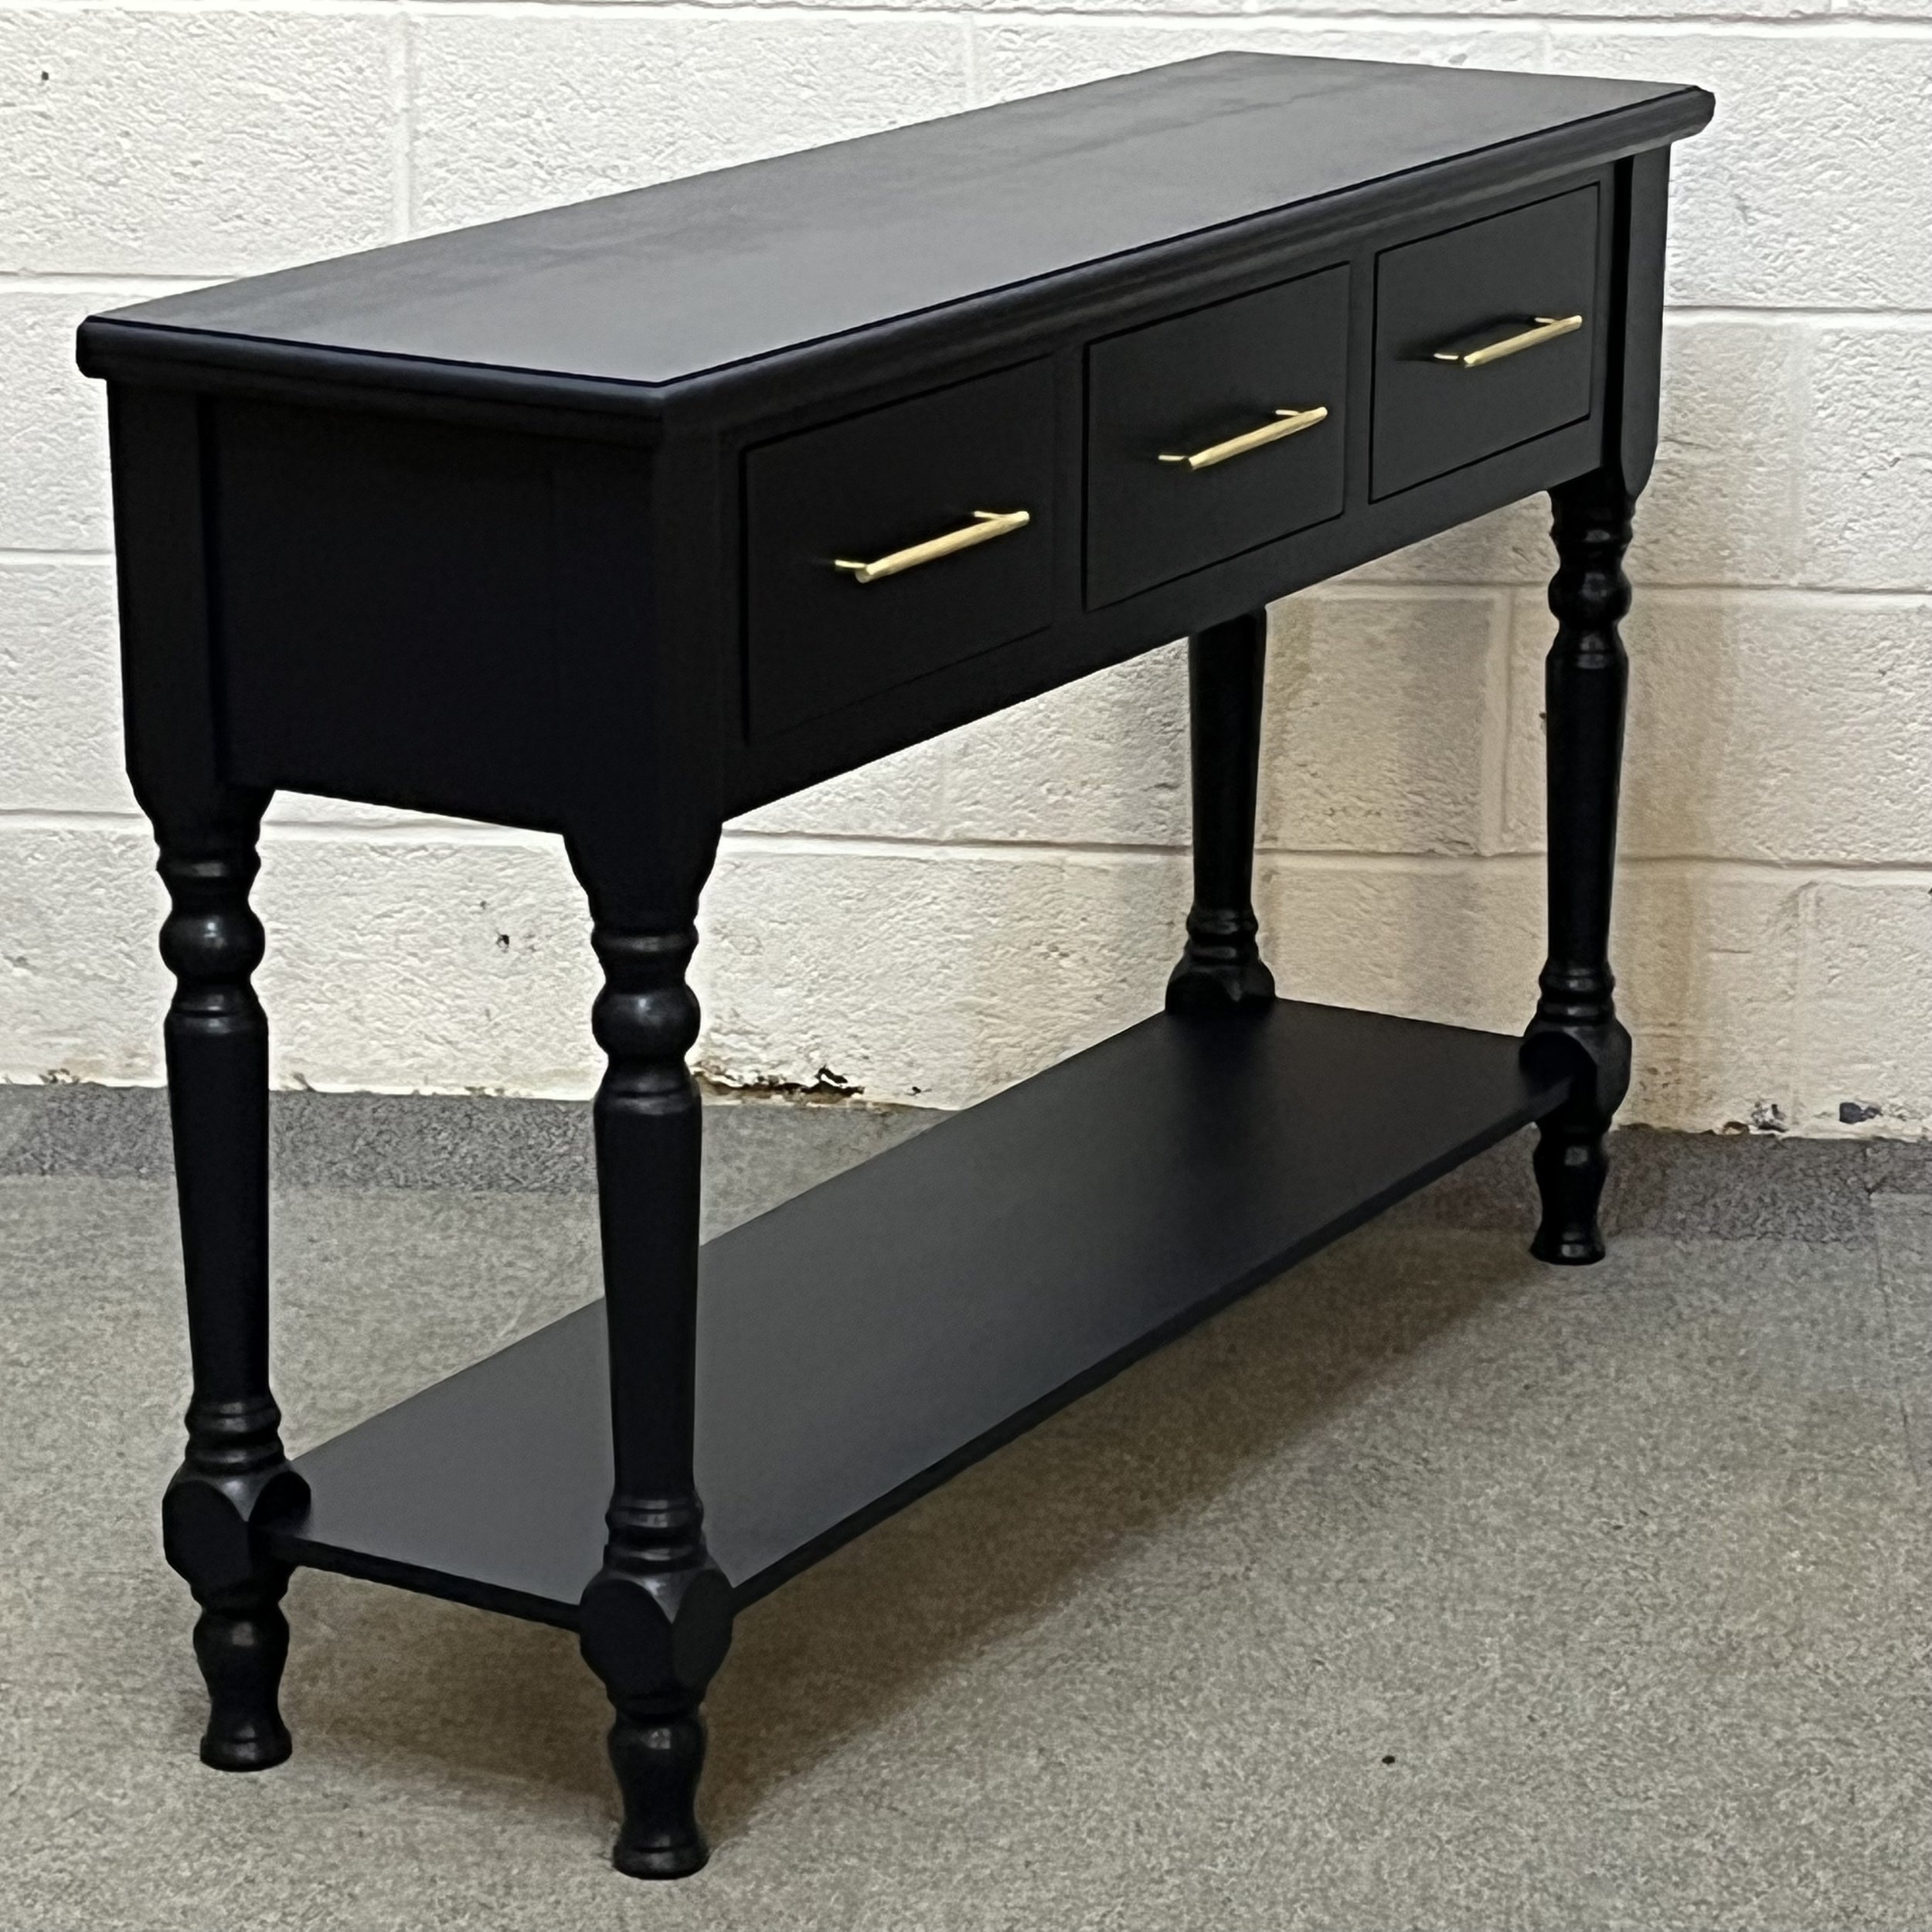 Painted Pine Console Table with 3 drawers